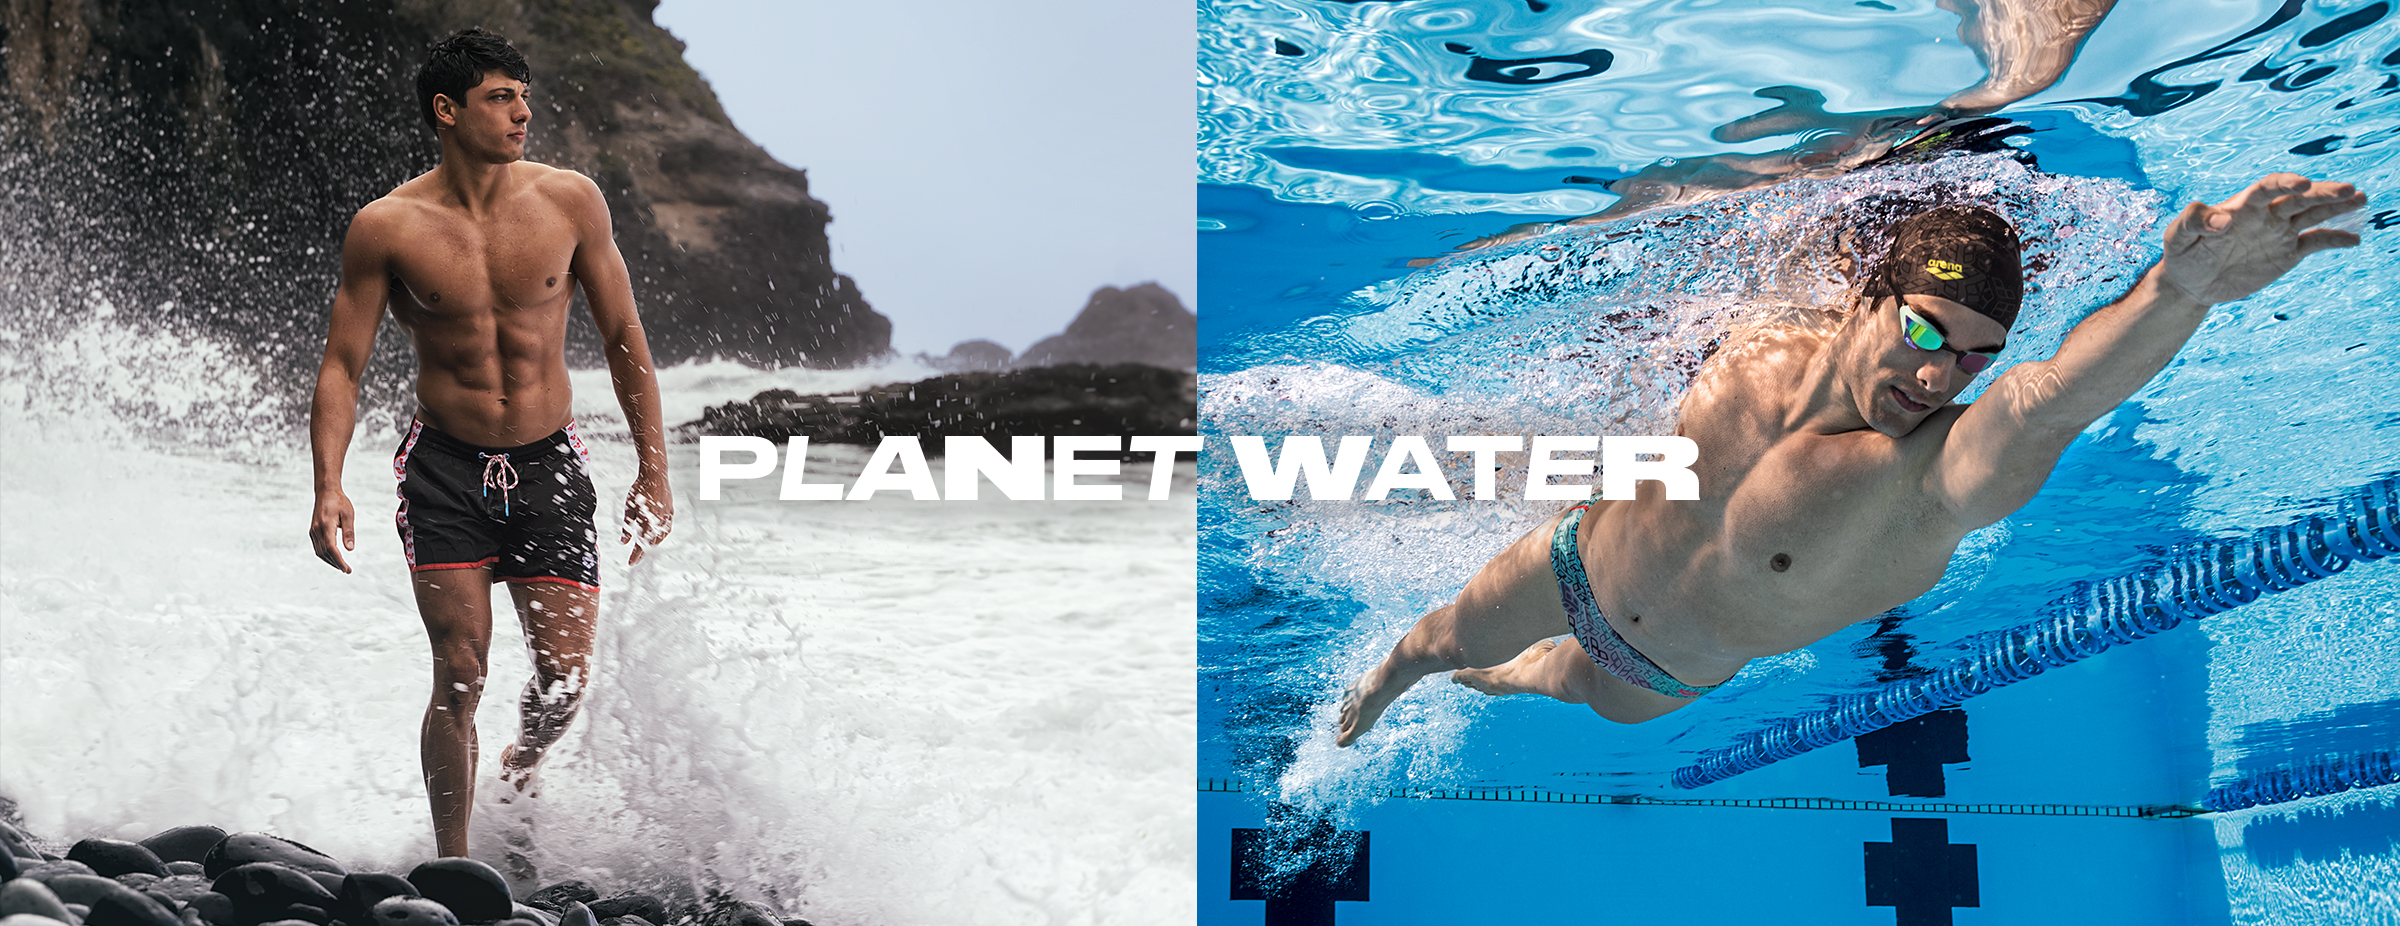 PLANET WATER